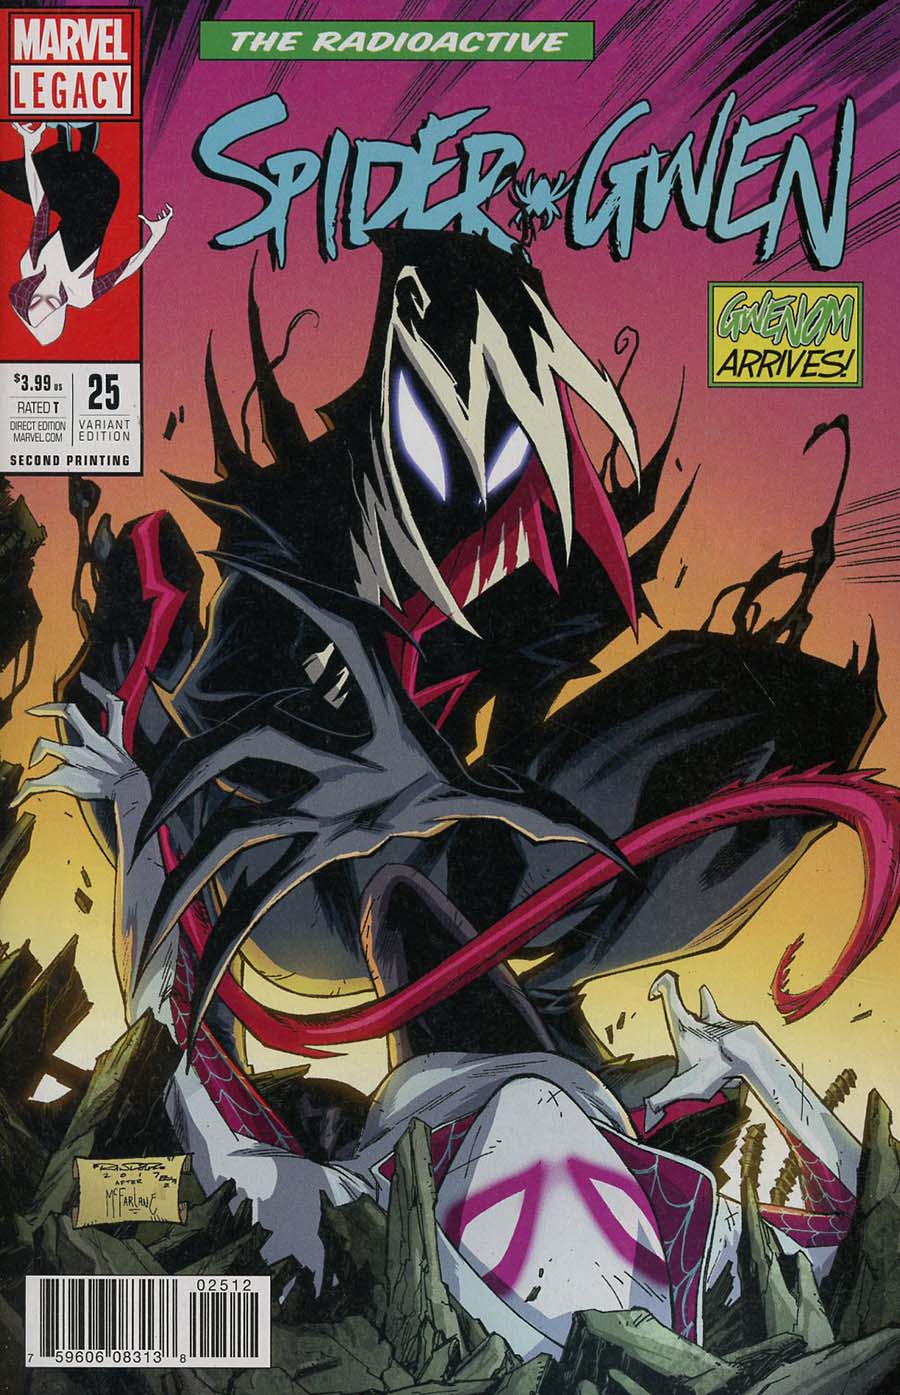 Spider-Gwen Vol 2 #25 Cover G 2nd Ptg Variant Khary Randolph Cover (Marvel Legacy Tie-In)